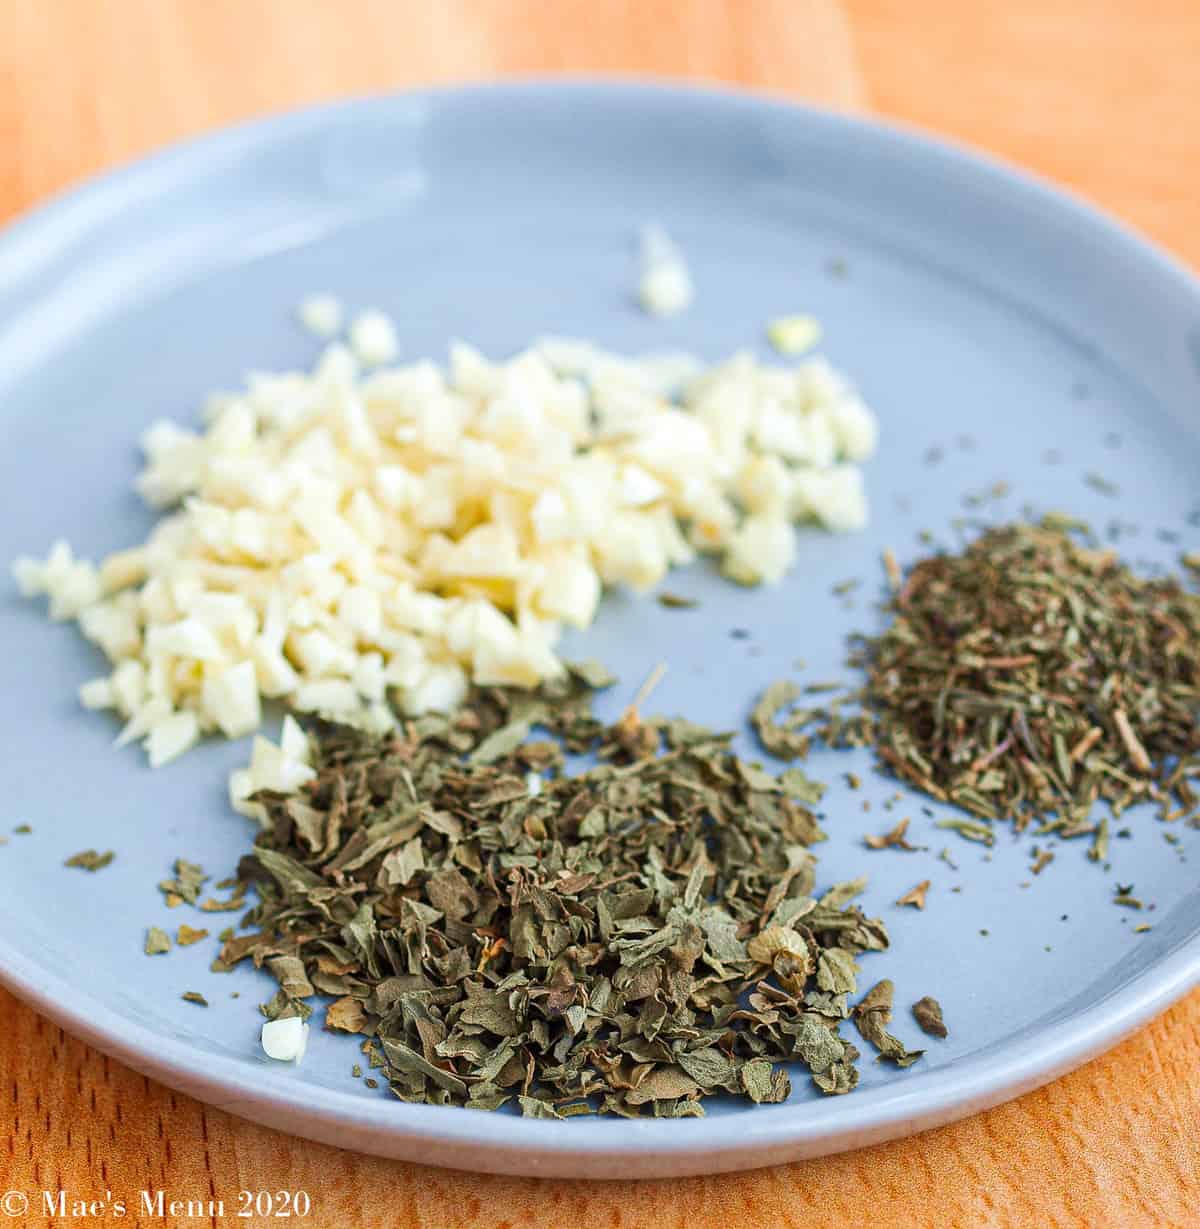 A small blue plate with piles of minced garlic, dried basil, and dried thyme on it.